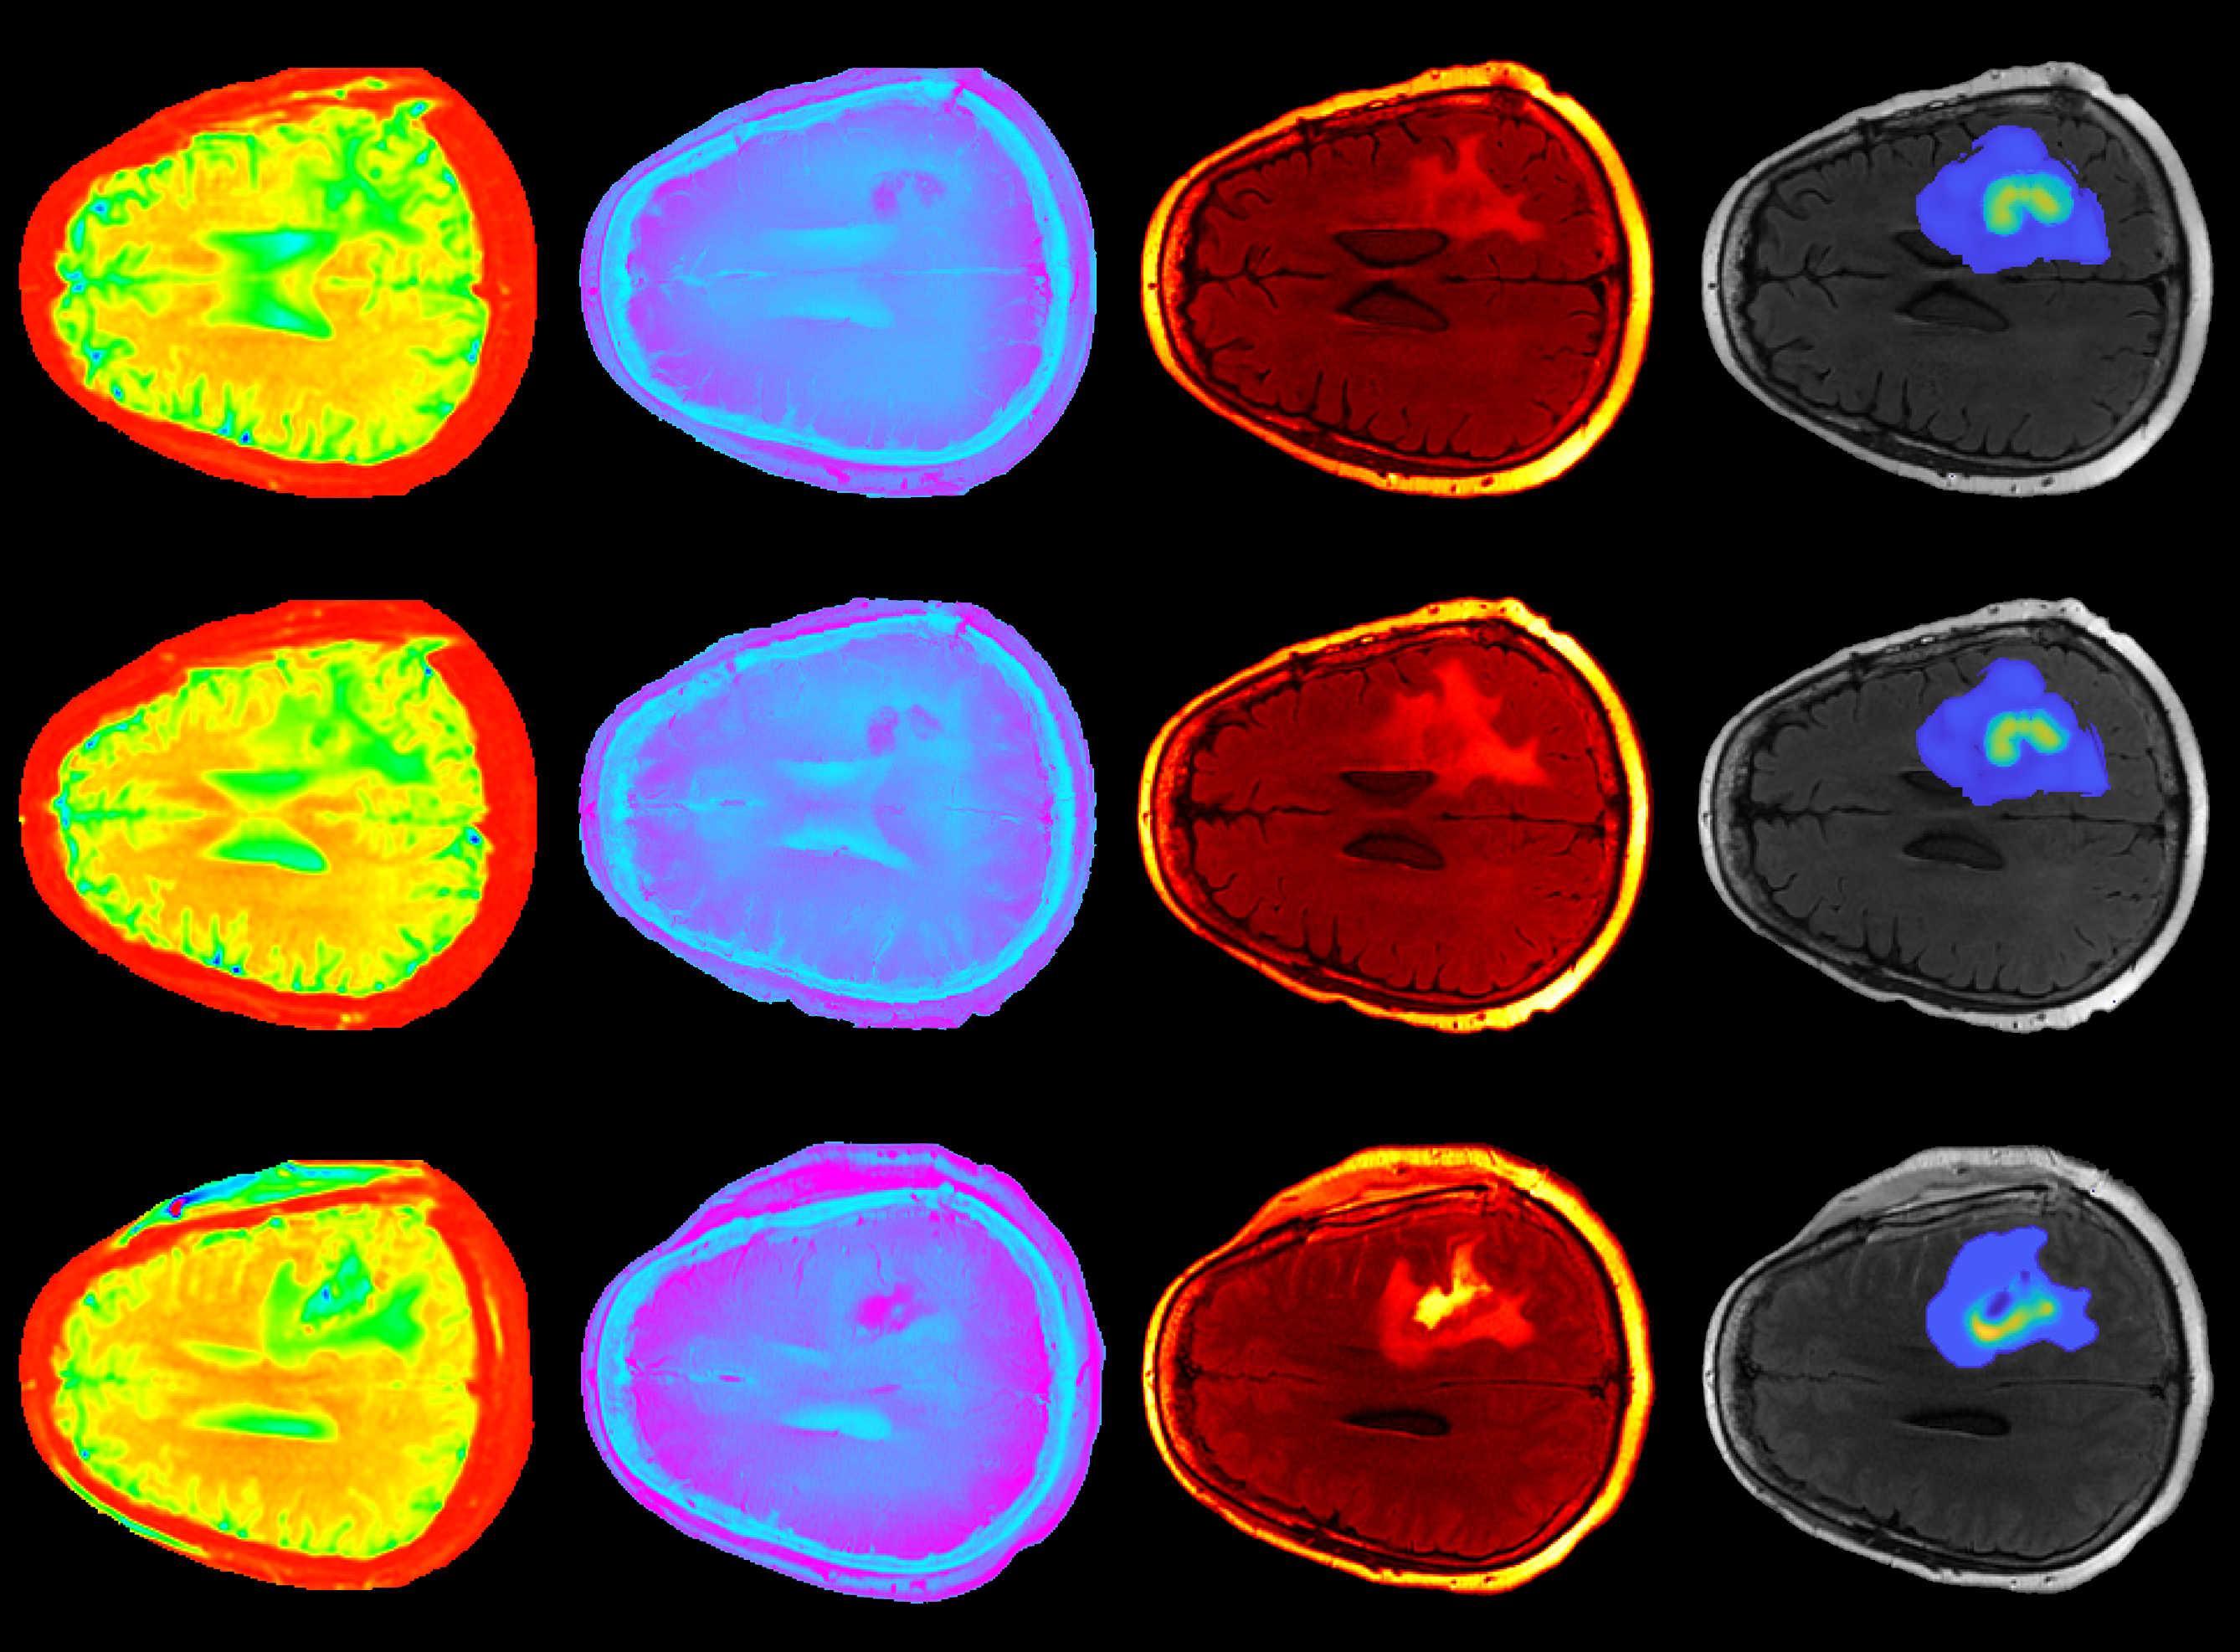 MRI data is used to personalize forecasts of response to chemotherapy and radiotherapy. Images are collected before and during radiotherapy enabling predictions of response prior to conclusion of treatment. Credit David Hormuth.